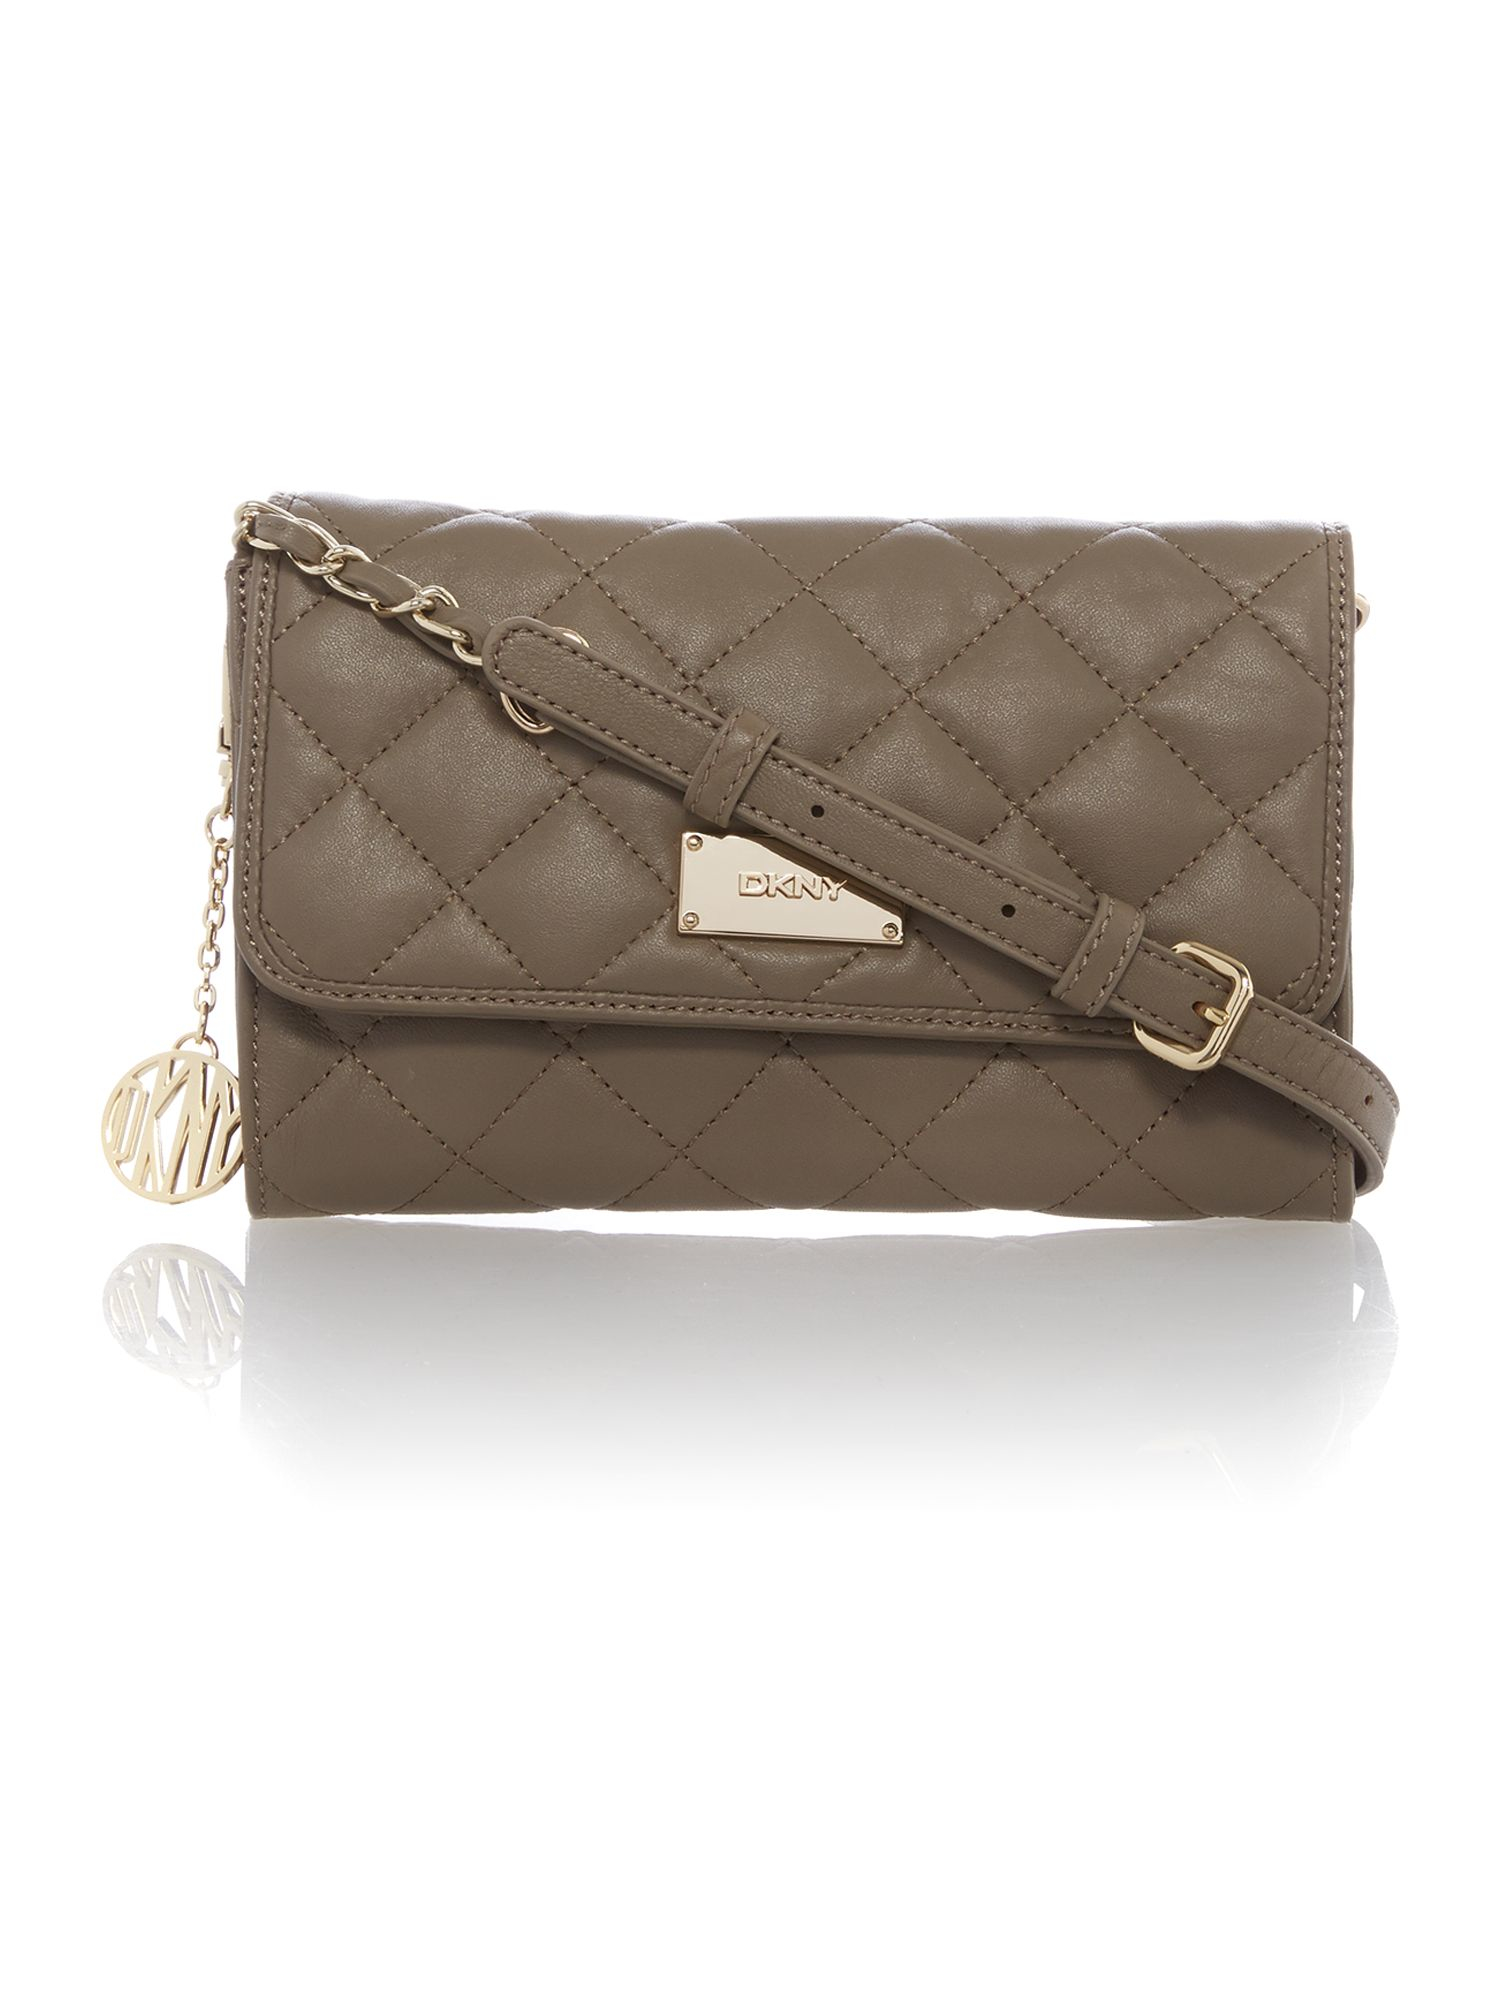 Dkny Quilt Taupe Small Flap Over Cross Body Bag in Metallic | Lyst